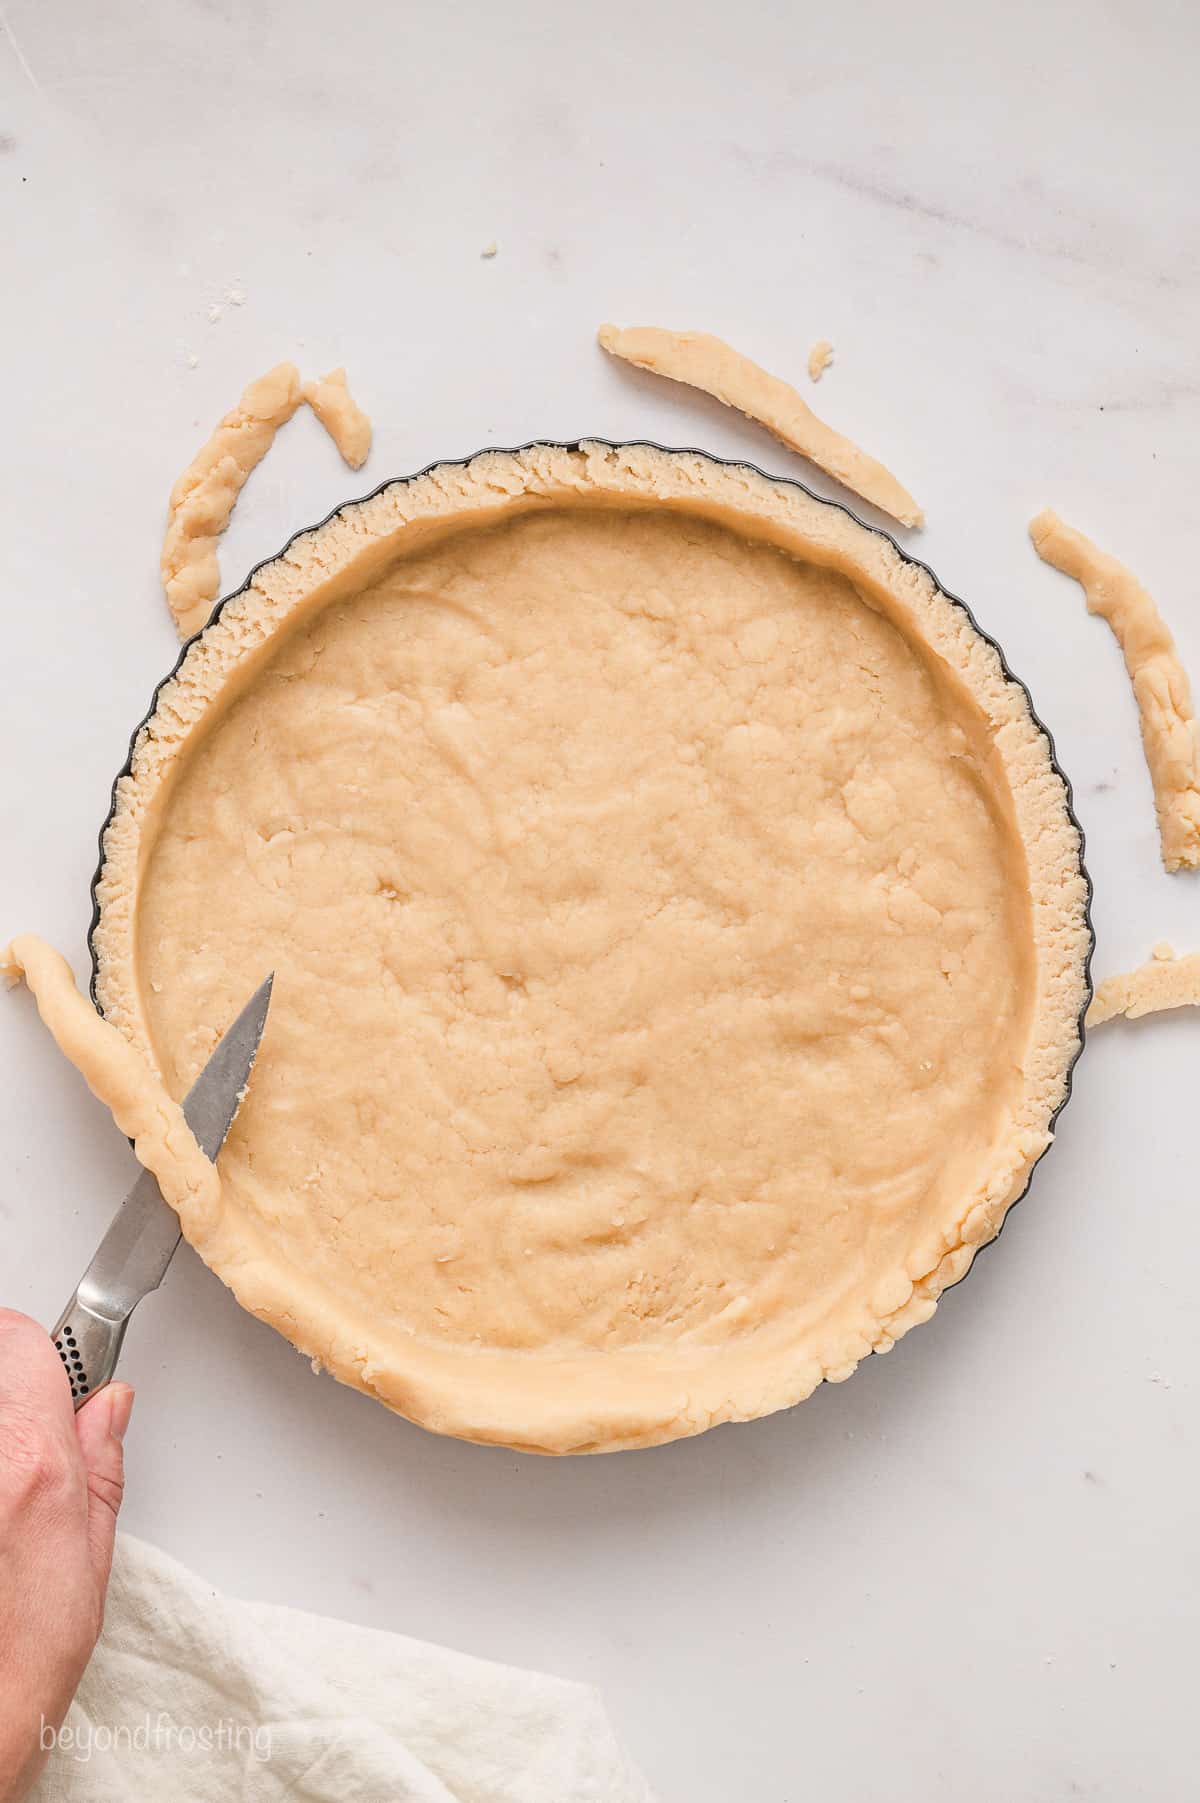 A hand uses a knife to trim away the excess pastry crust from a pie plate.